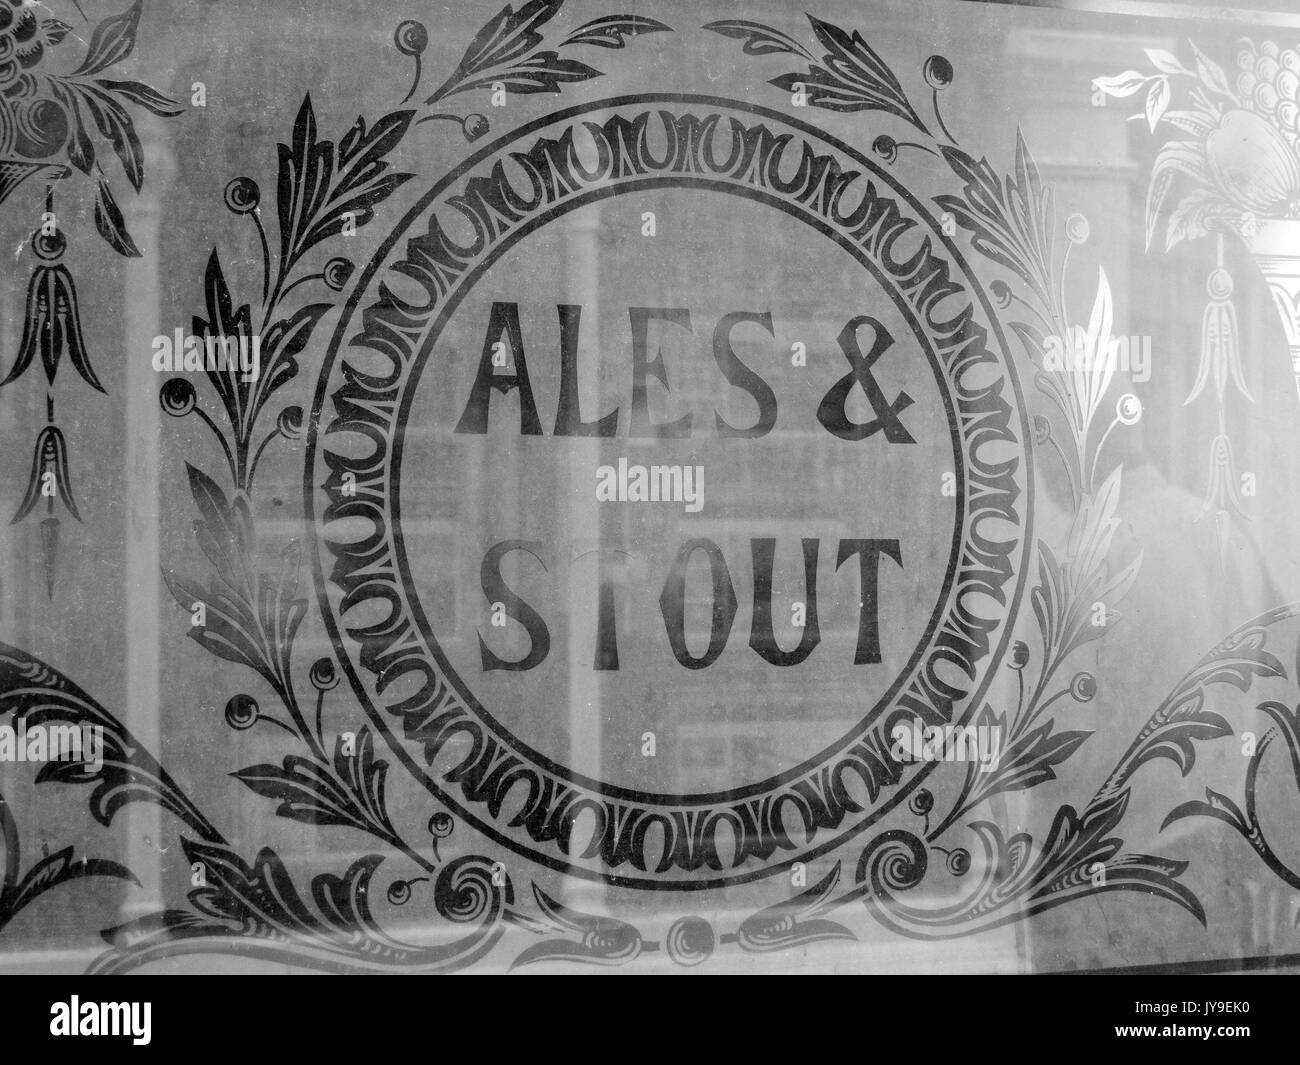 Old ales and stout advertisement sign etched into public house window Stock Photo